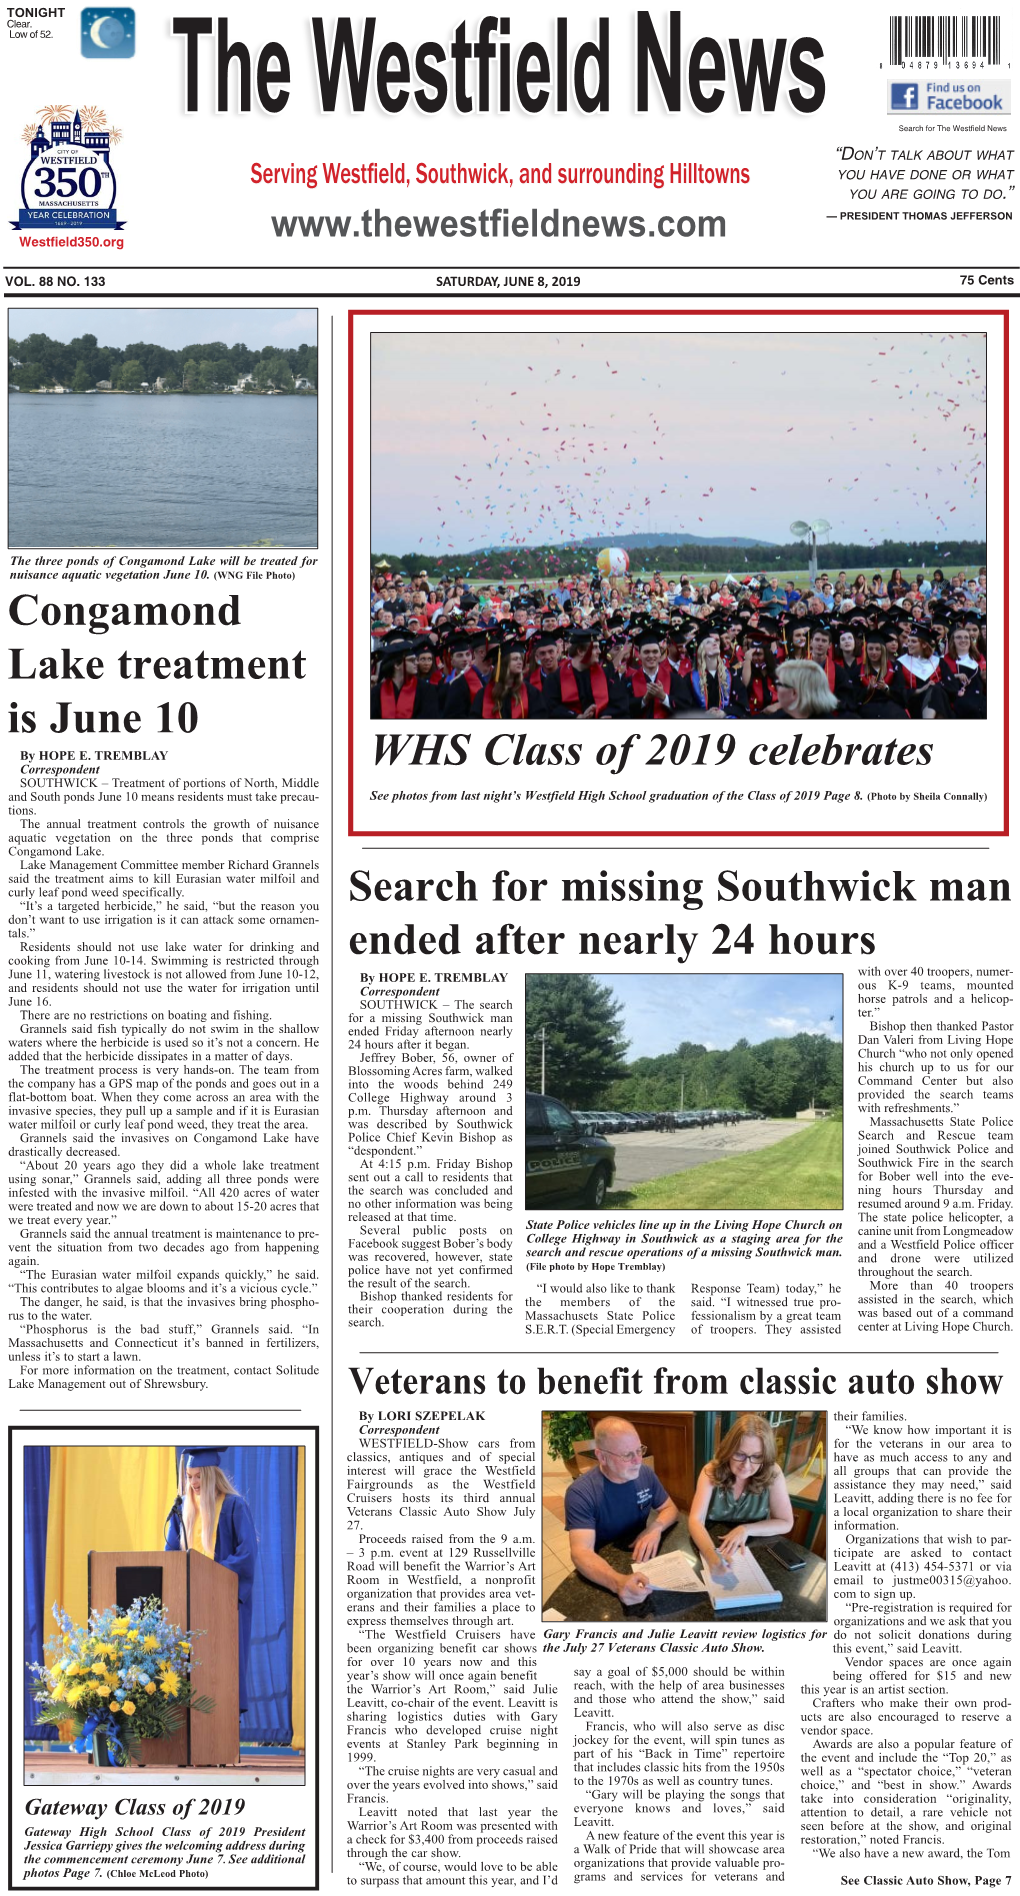 WHS Class of 2019 Celebrates